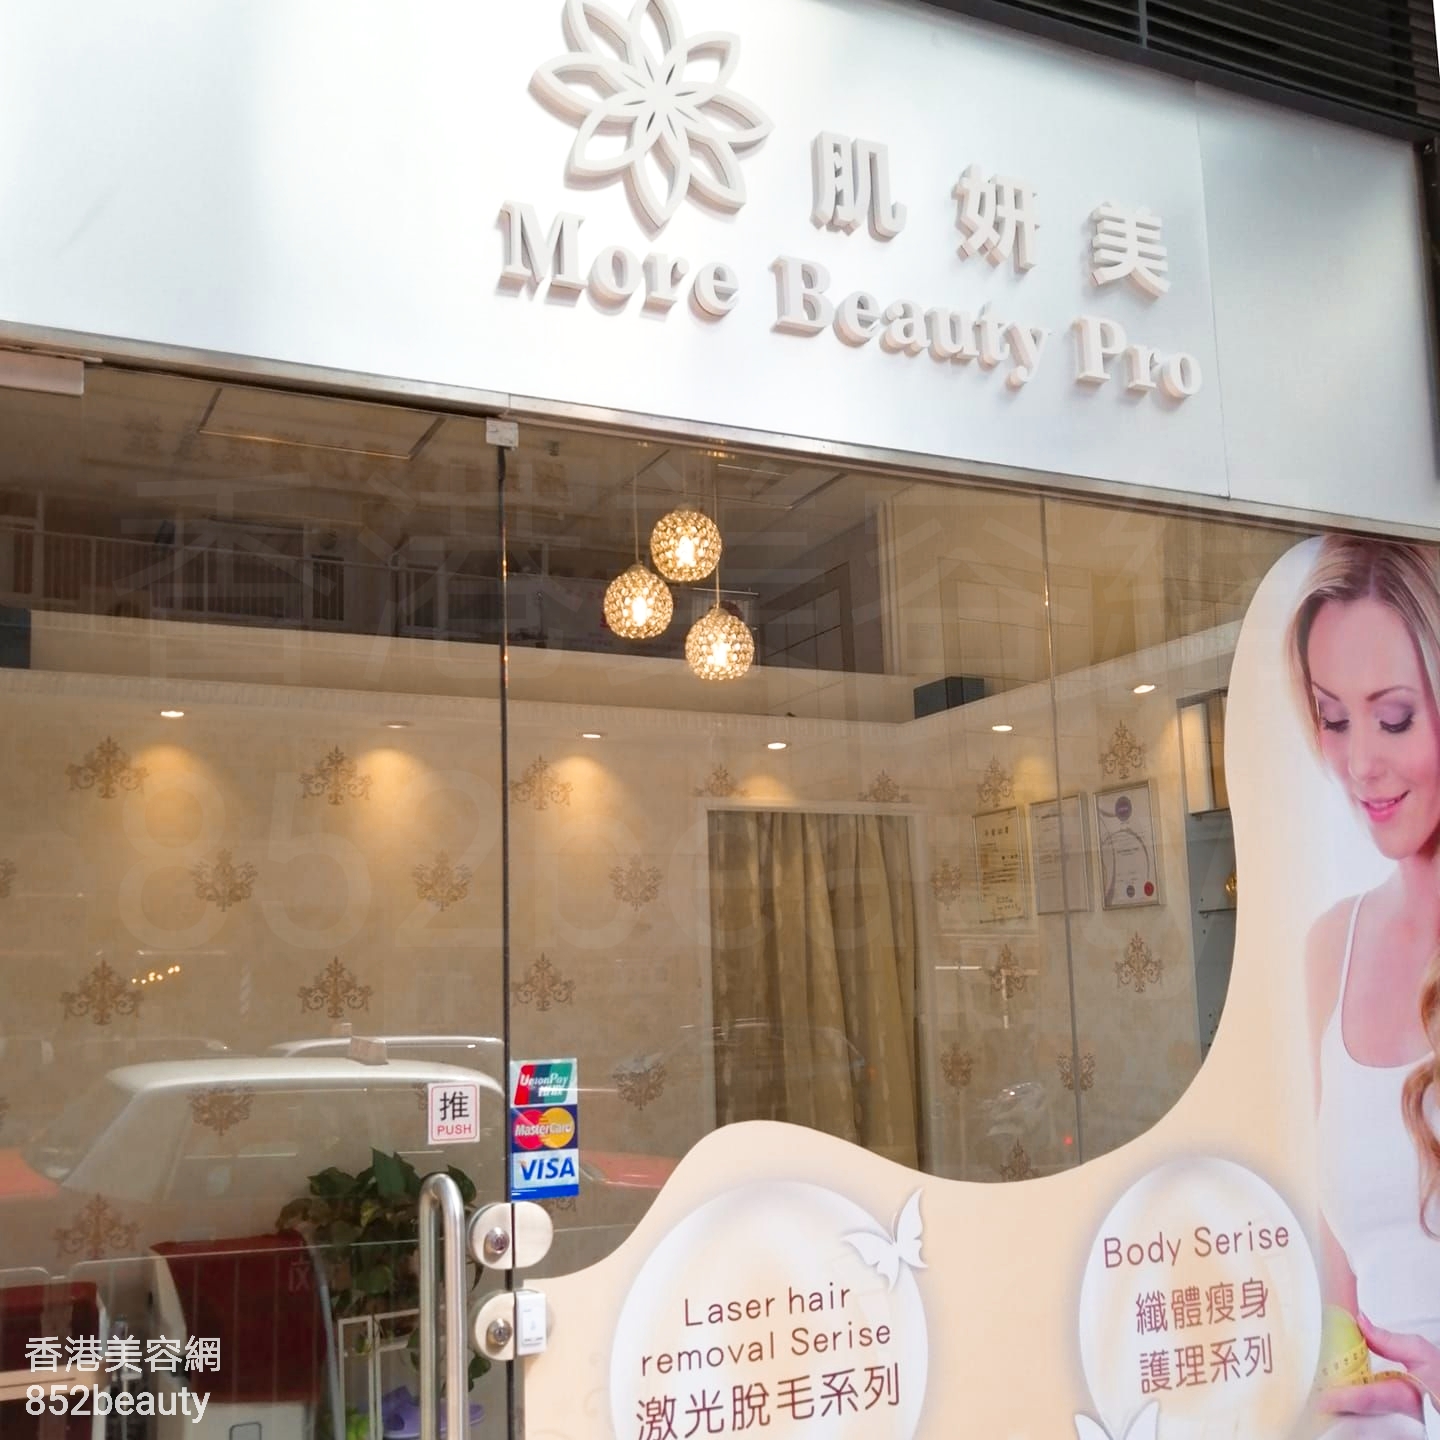 Hair Removal: More Beauty Pro肌妍美（長沙灣店）